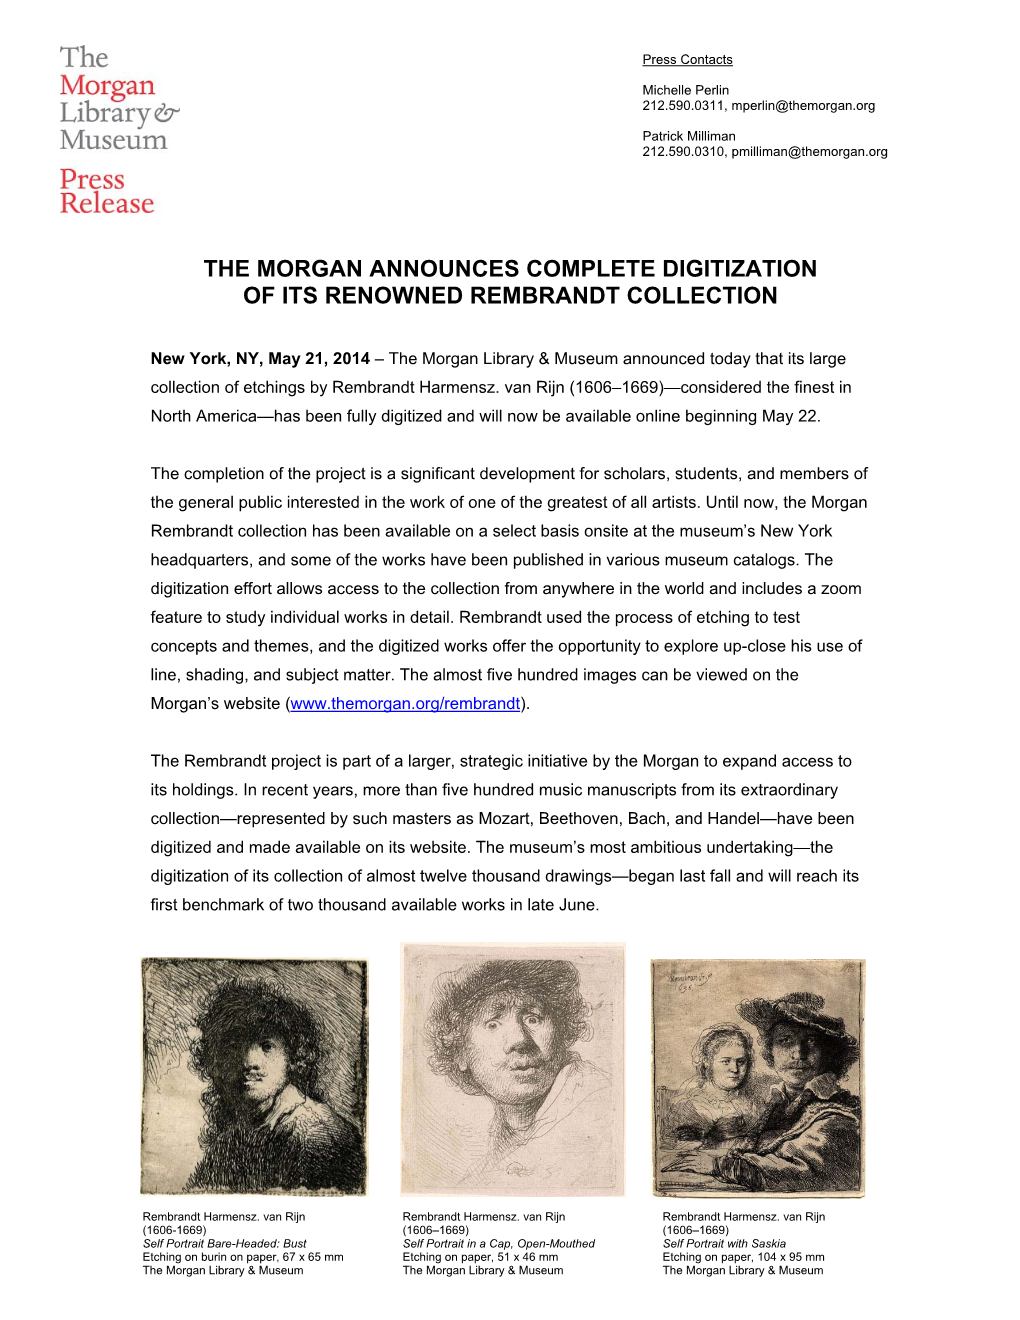 The Morgan Announces Complete Digitization of Its Renowned Rembrandt Collection